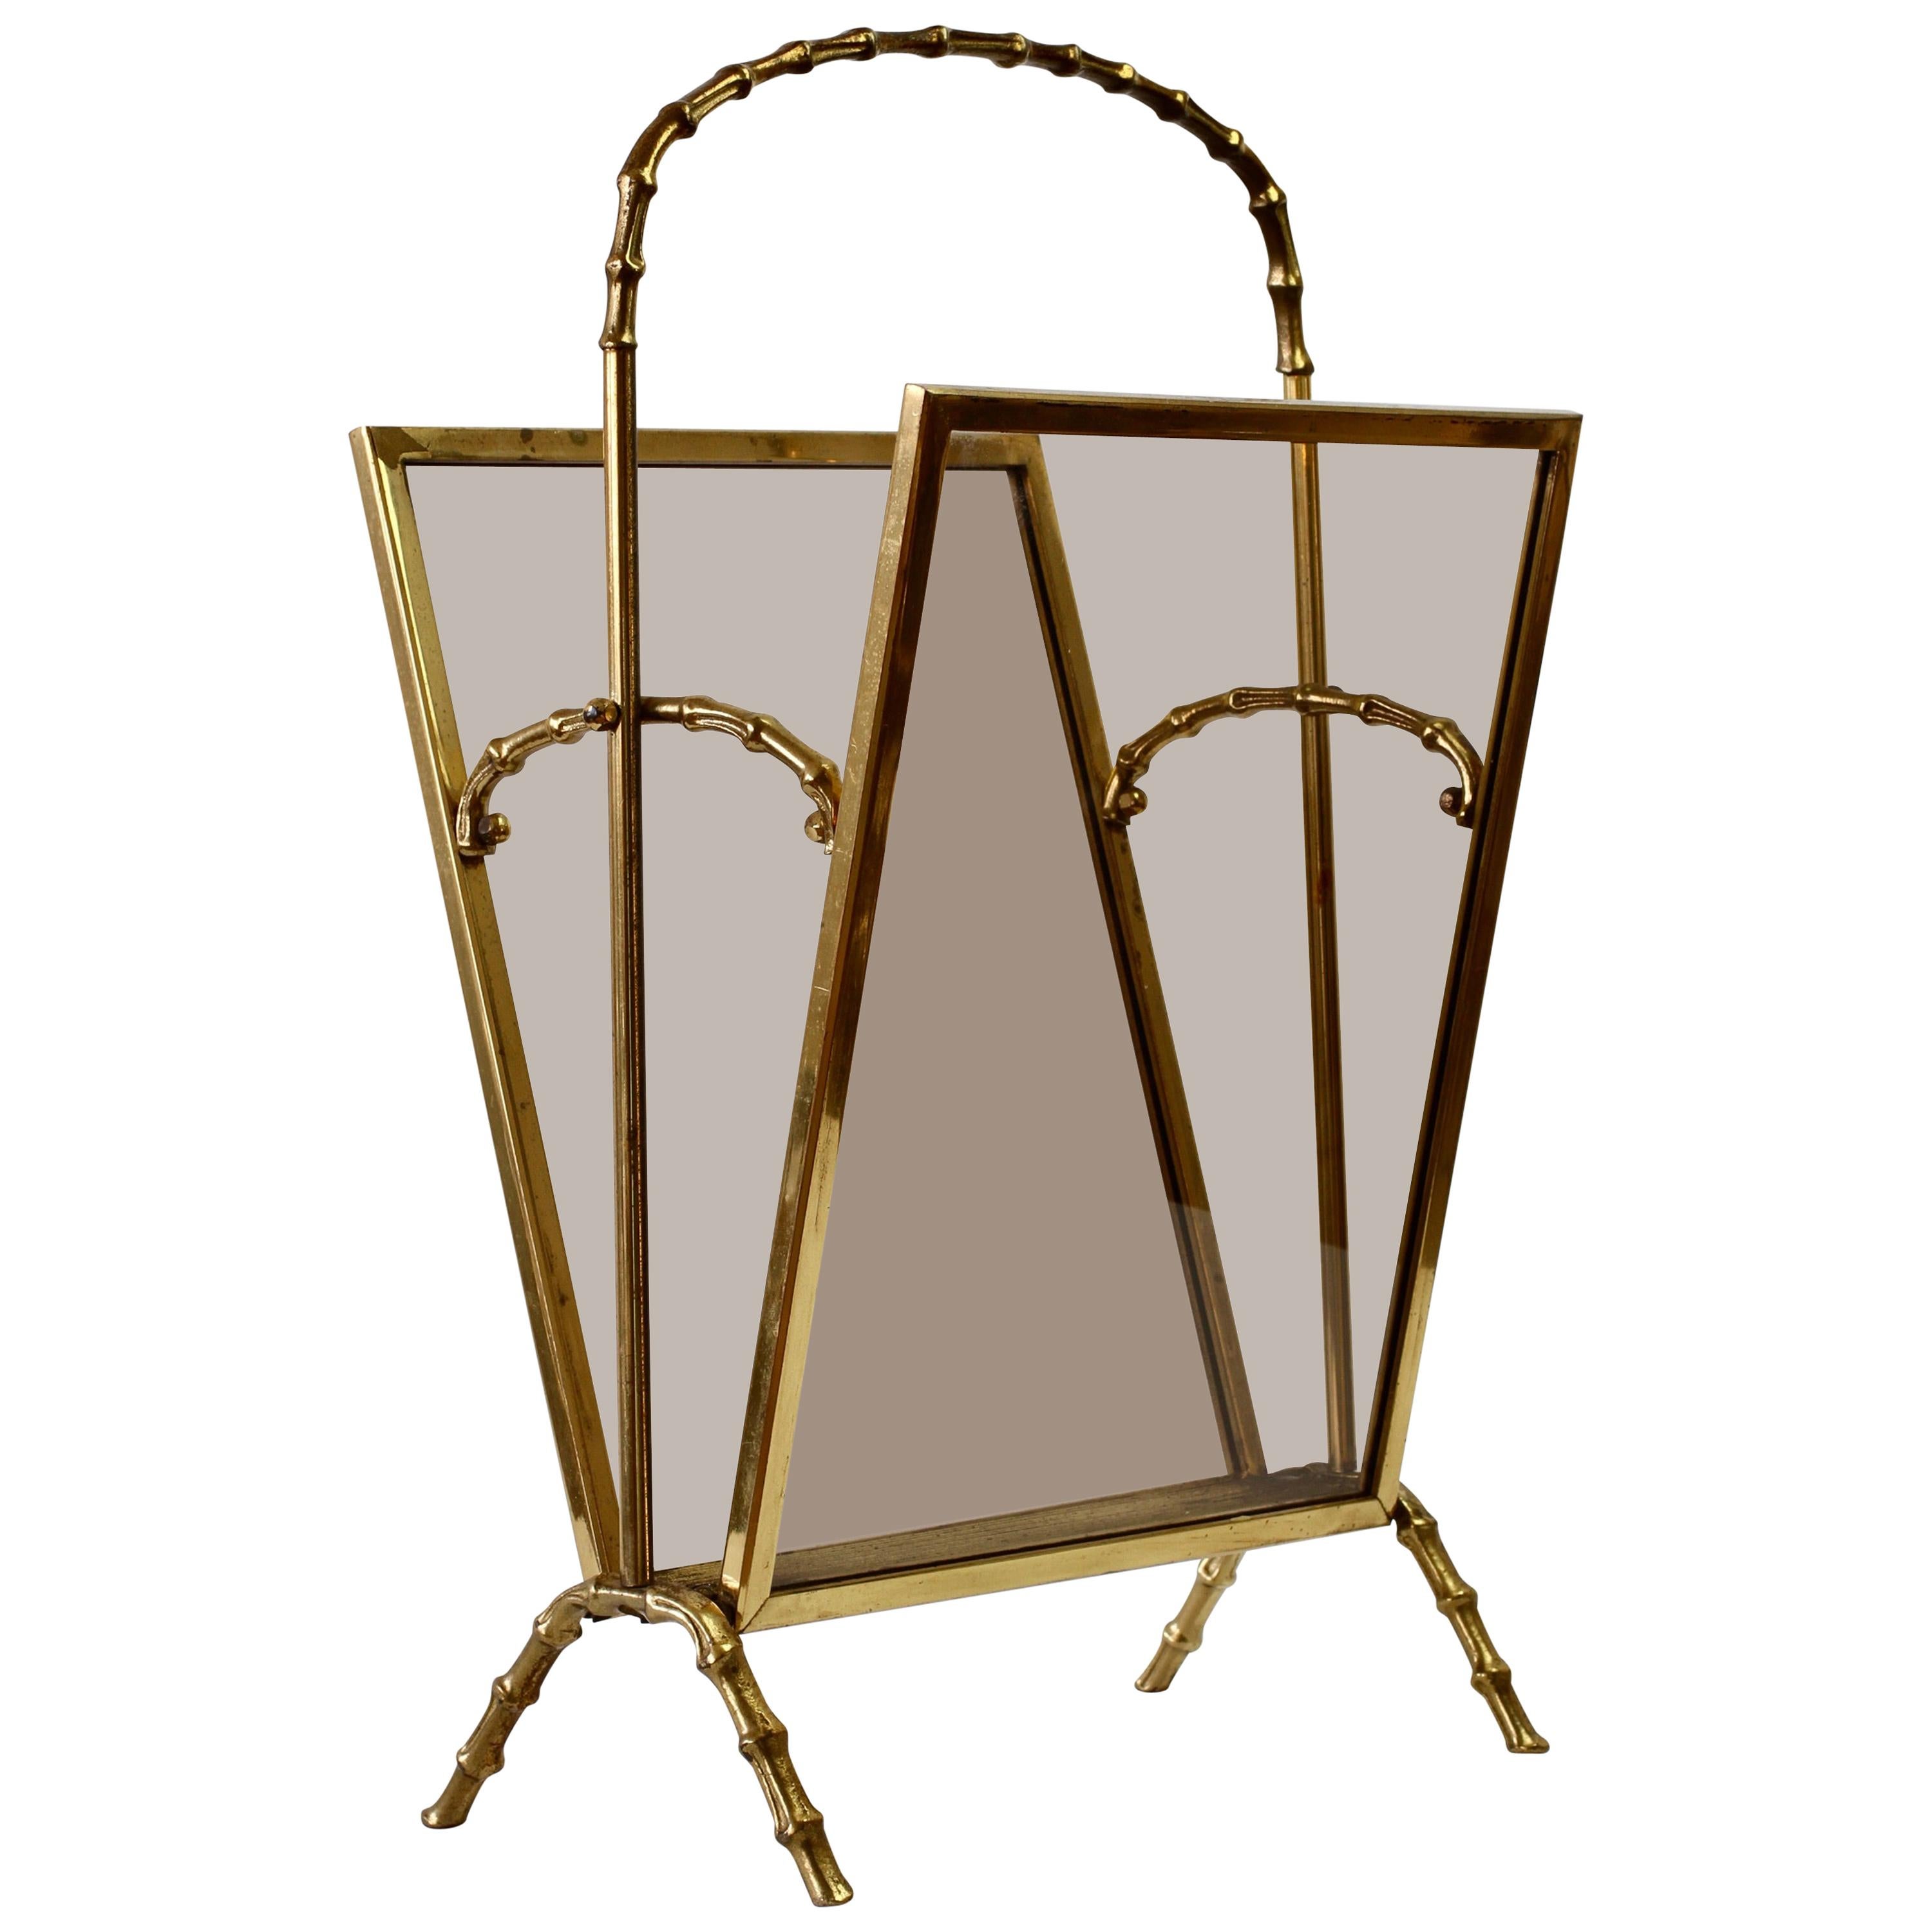 Maison Baguès Attr. Cast Brass Faux Bamboo Magazine Rack or Newspaper Stand